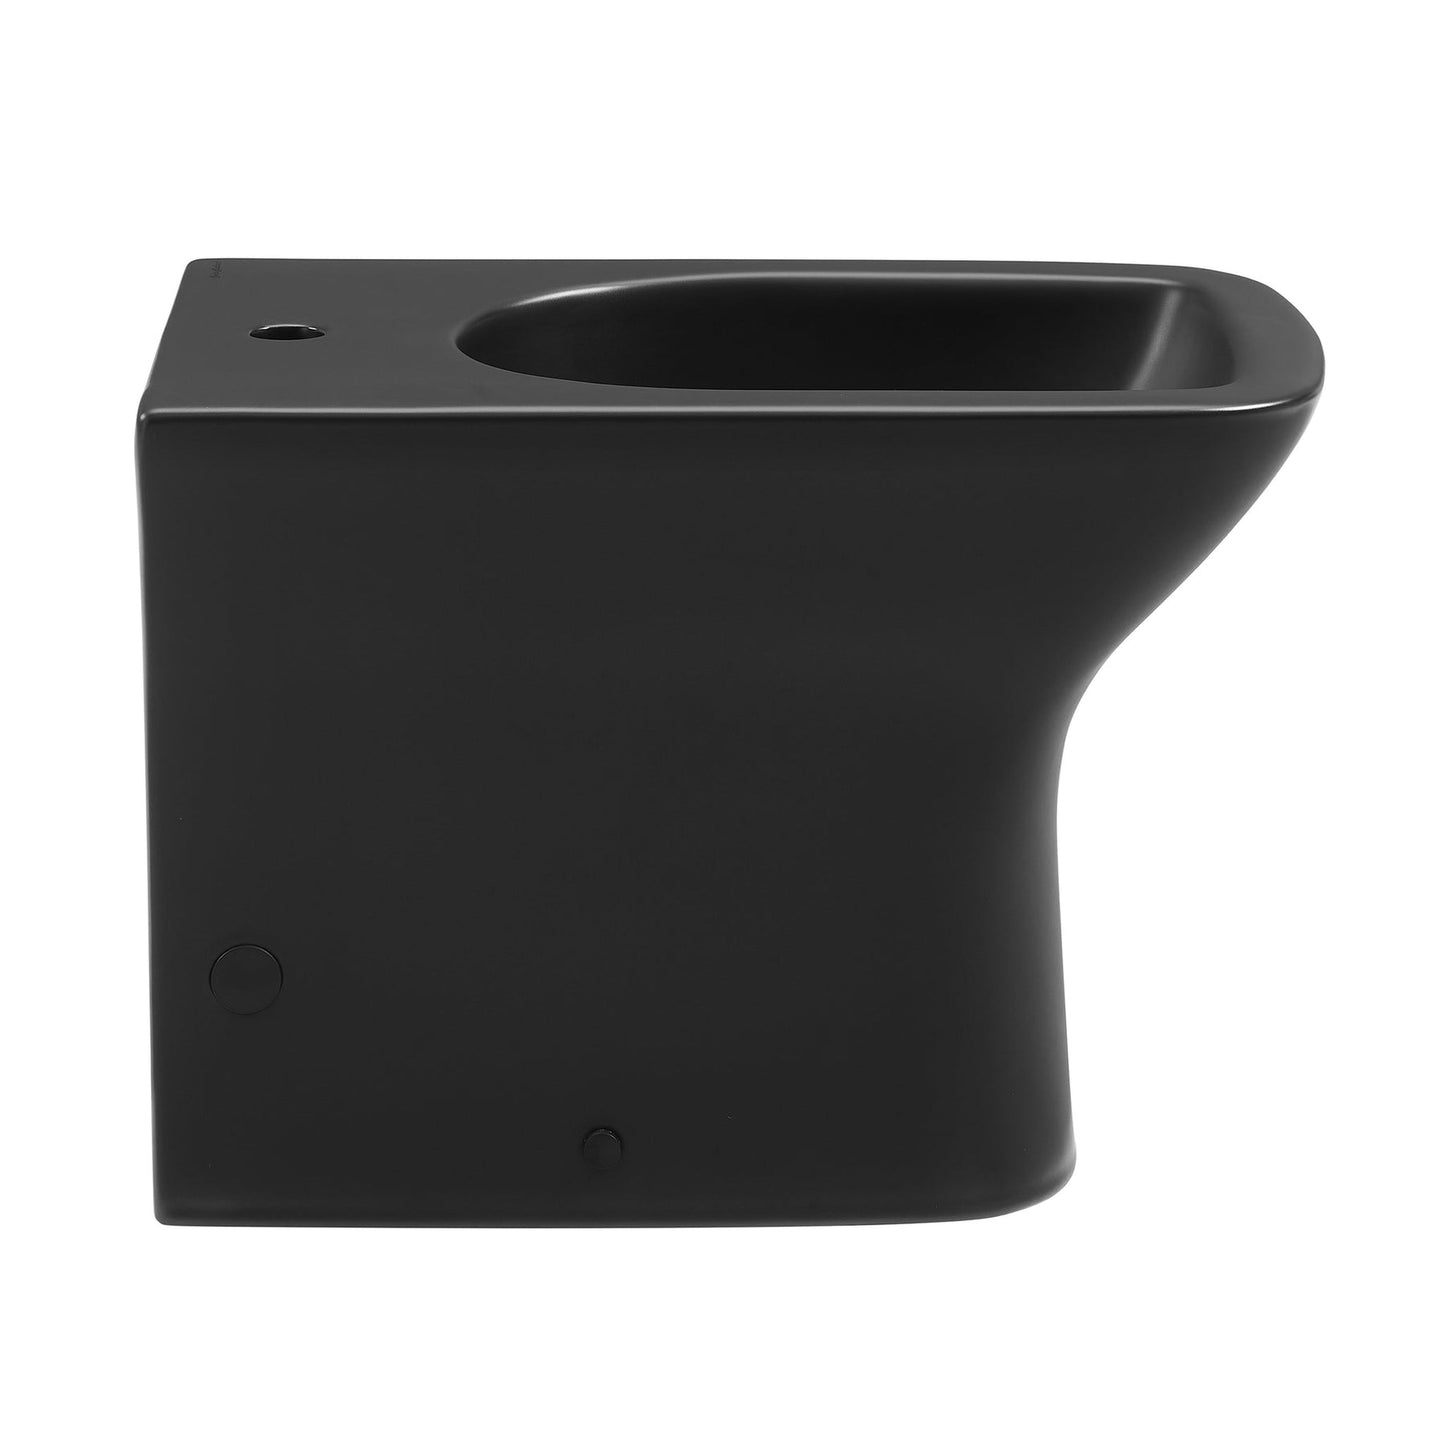 Swiss Madison Carré 22" x 14" Matte Black Square Back-To-Wall Bidet With Single Faucet Hole and Chrome Overflow Cover